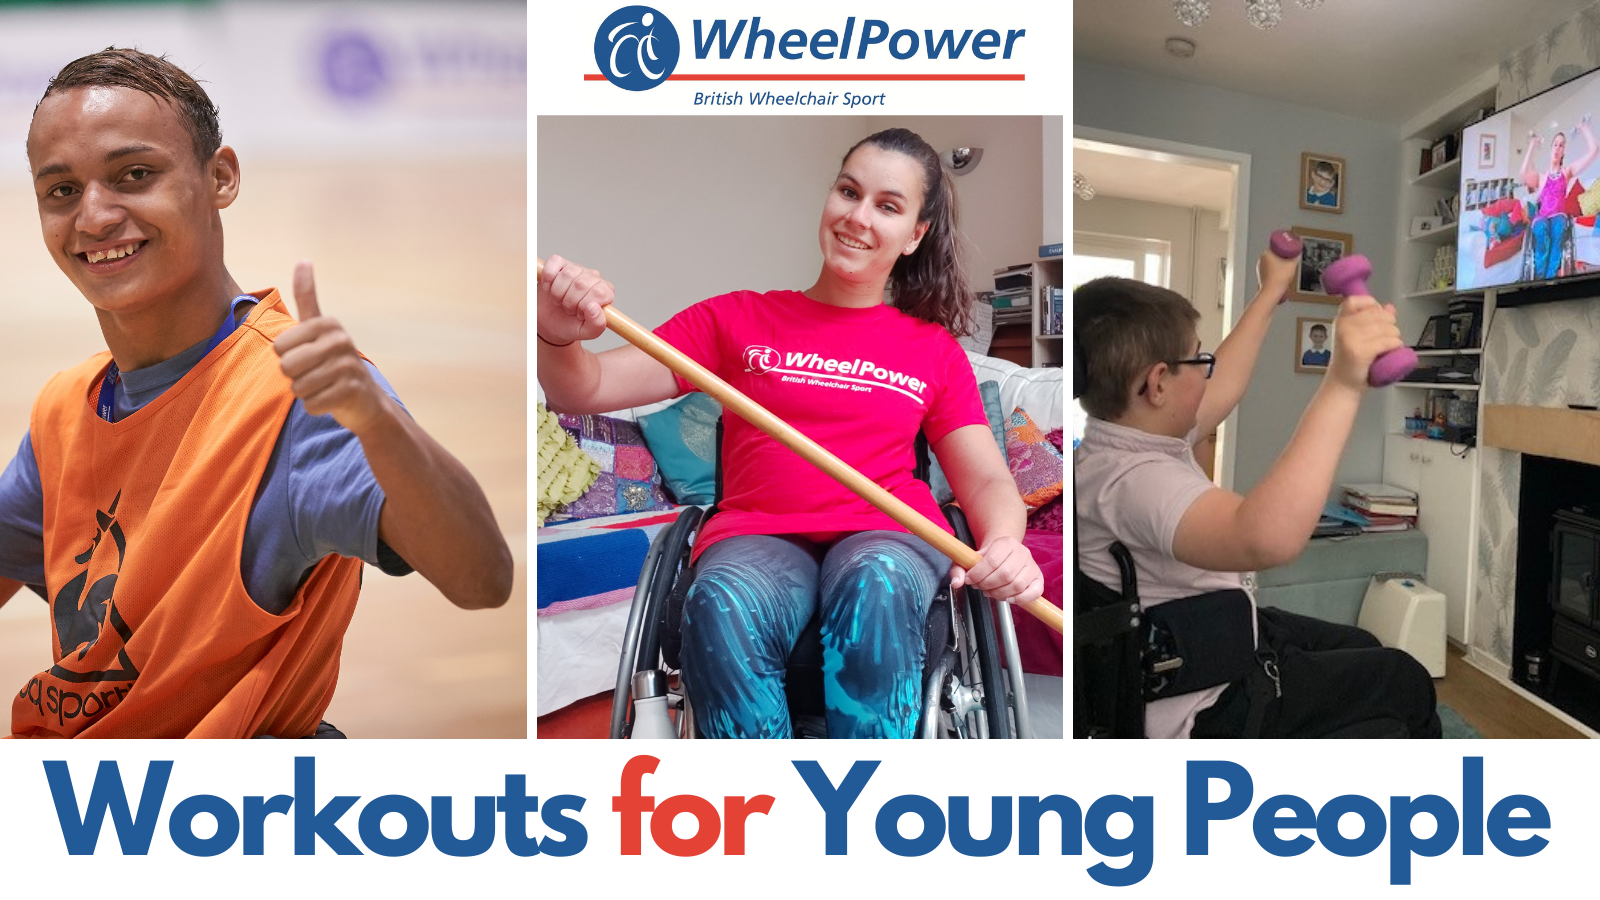 WheelPower to release 10 NEW Inclusive Workouts for Young Disabled People during Lockdown